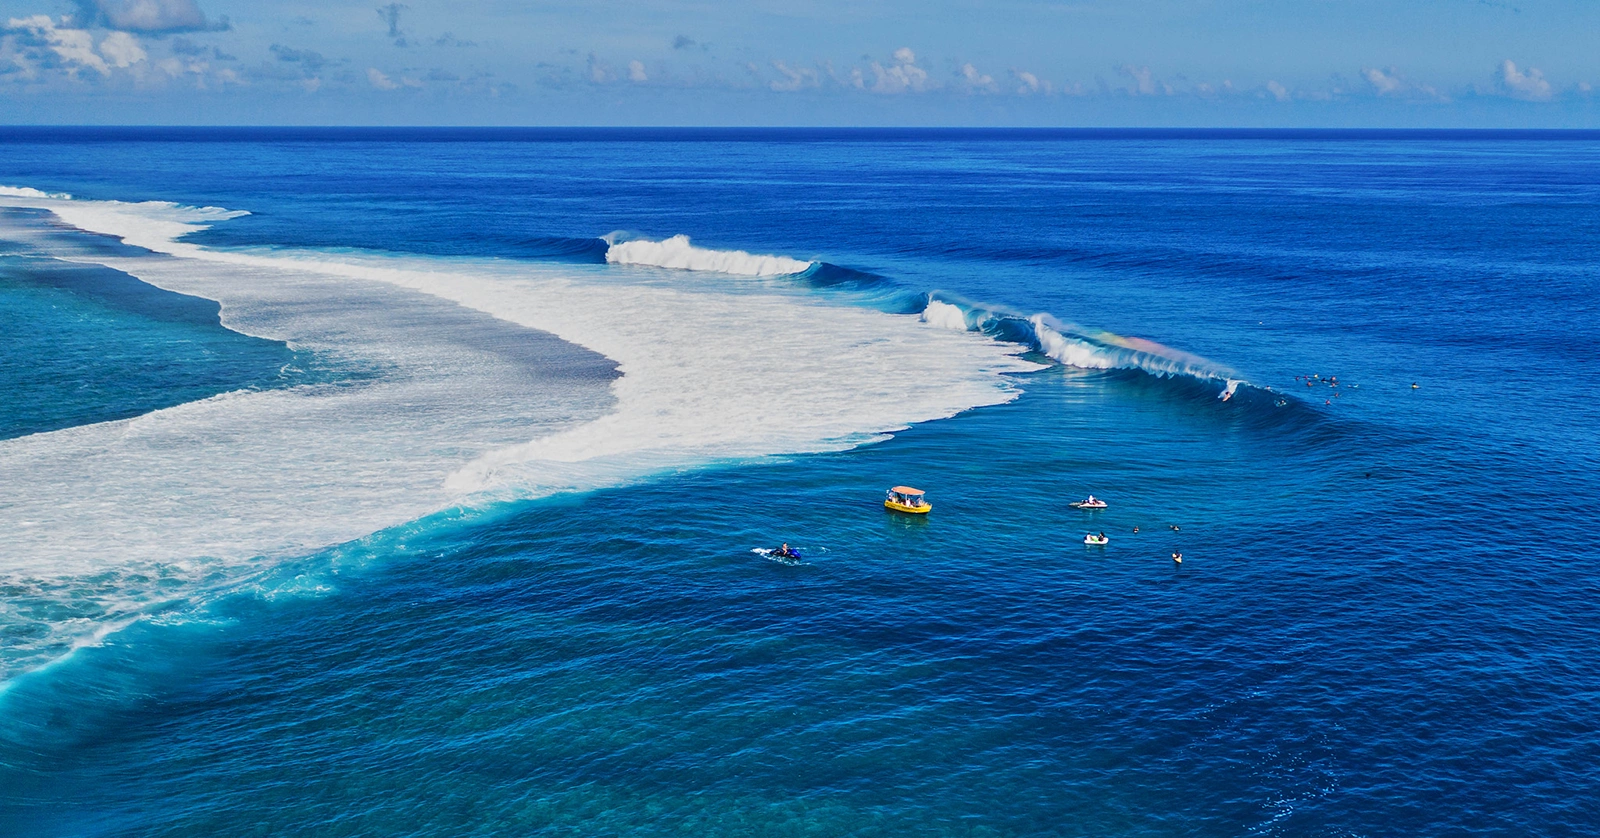 WHY THE 2024 PARIS OLYMPIC SURFING EVENT IS BEING HOSTED IN TEAHUPOO, FRENCH POLYNESIA